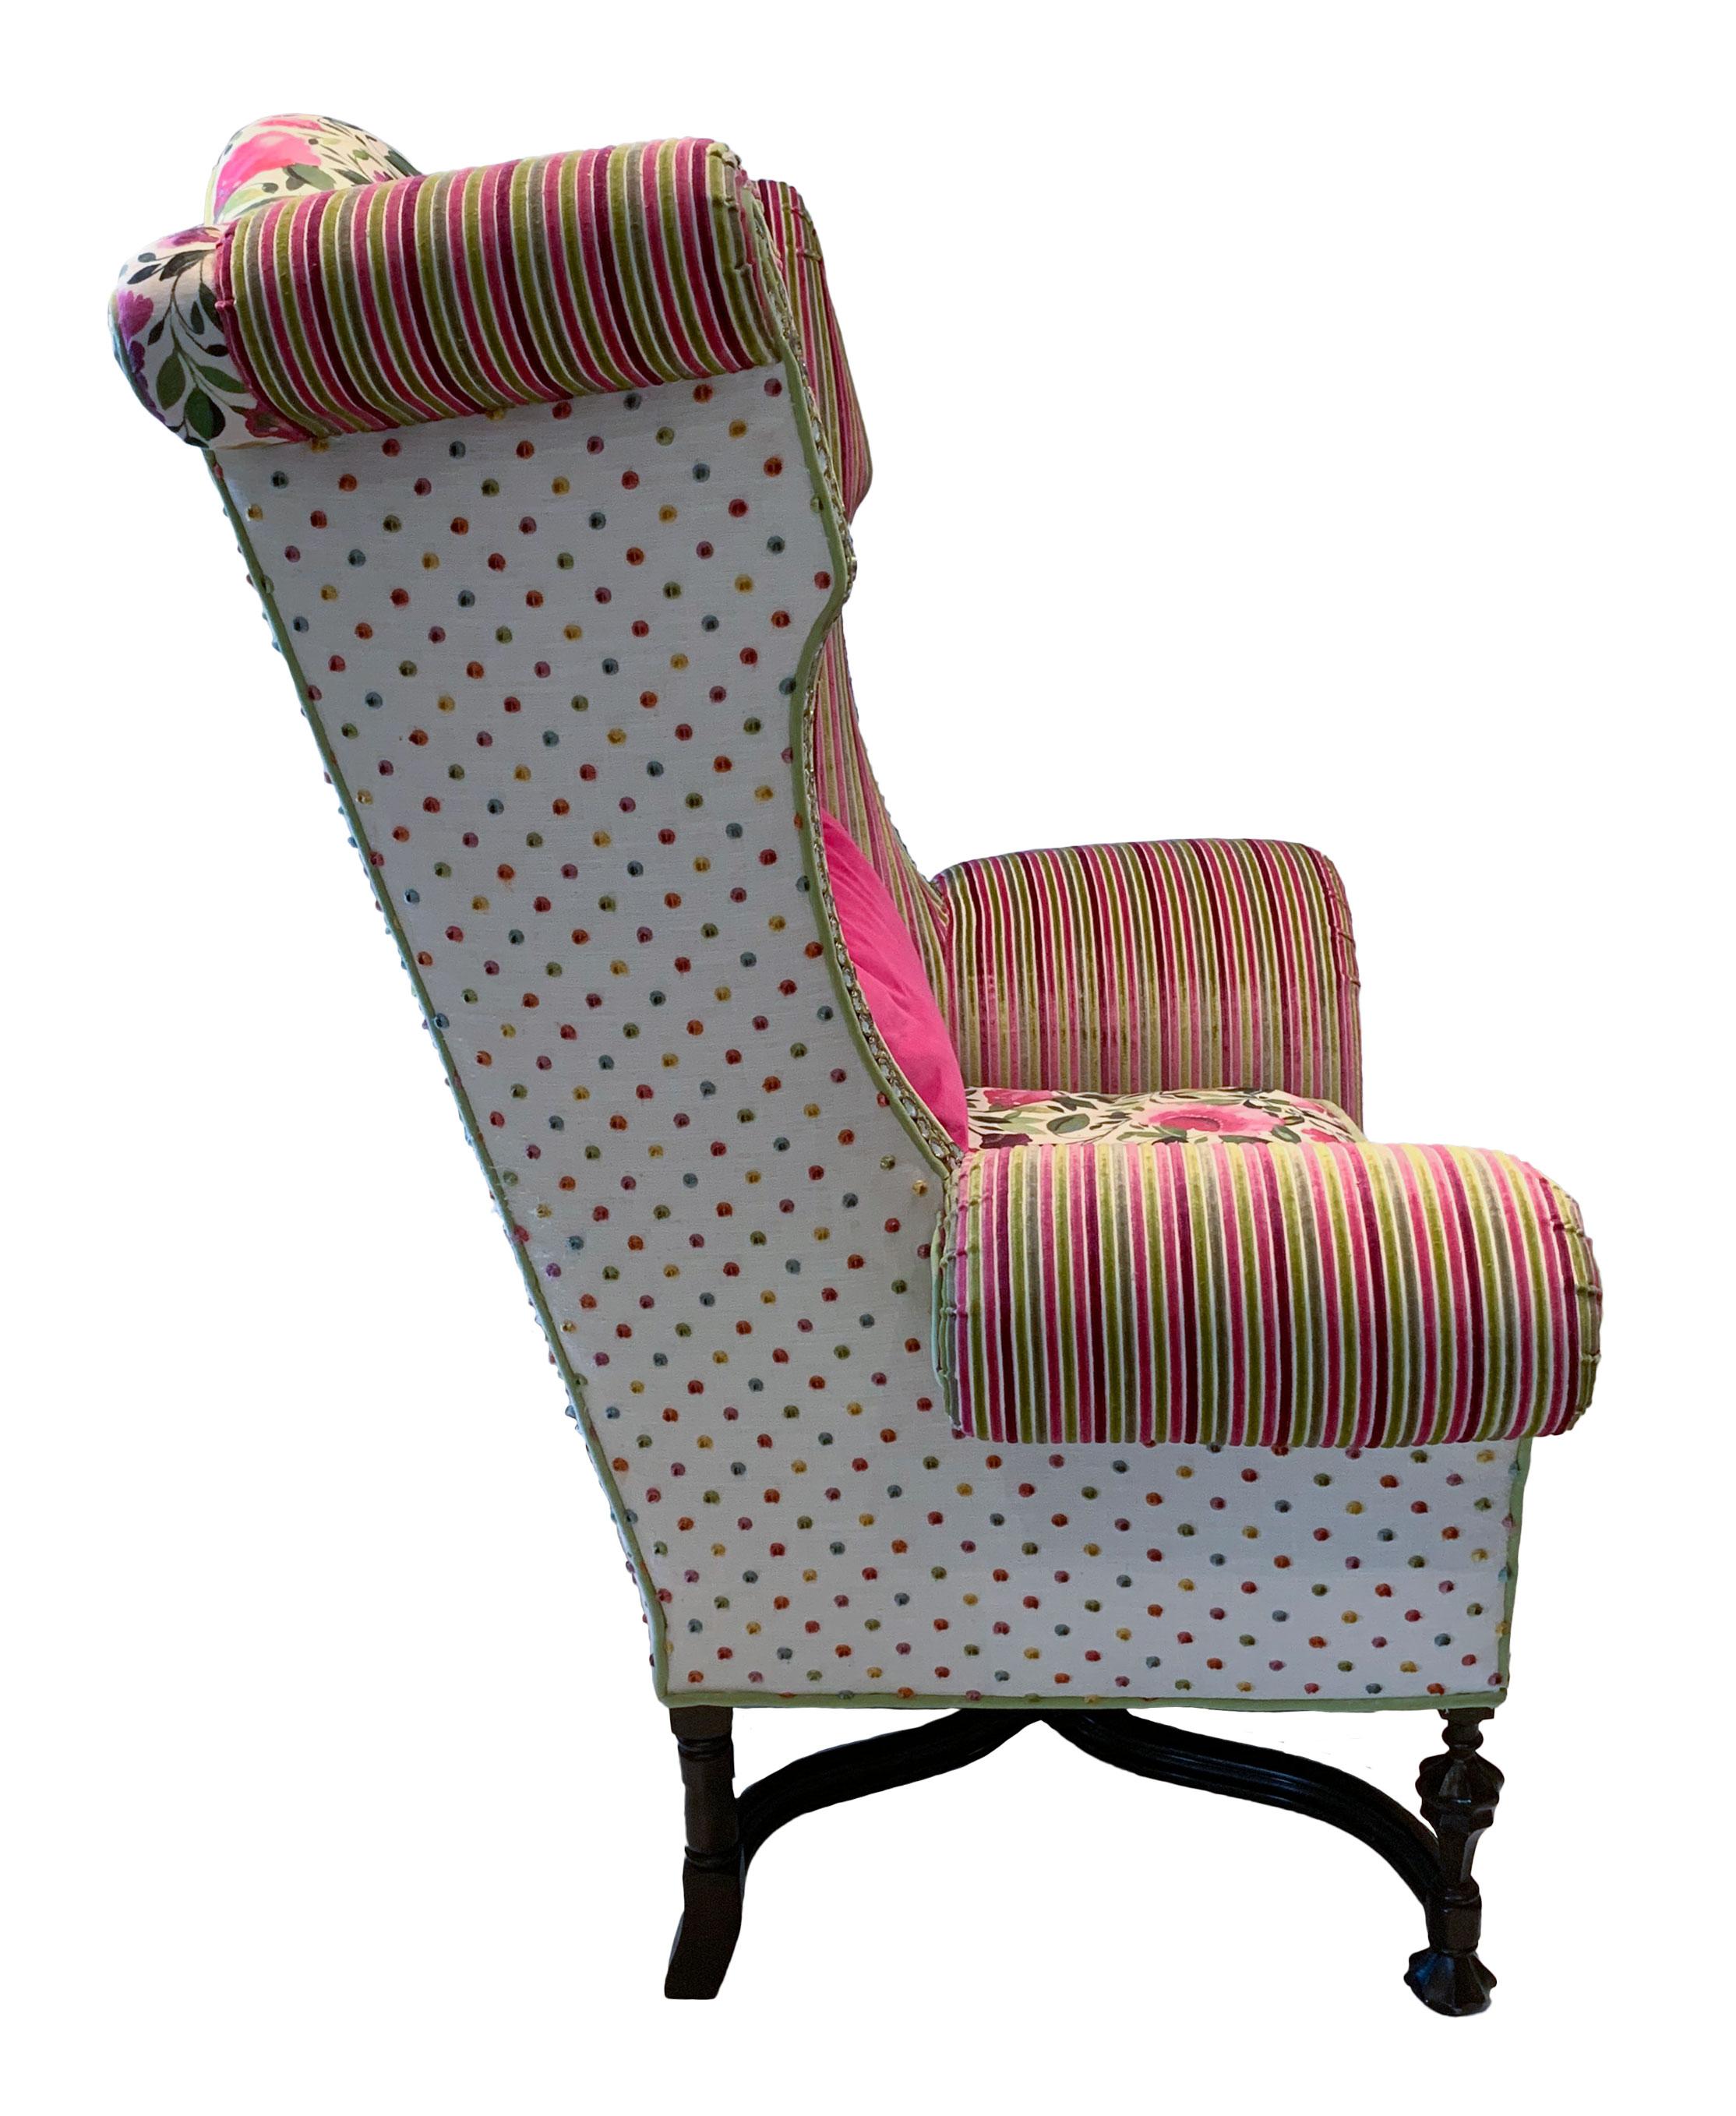 Vintage 1990s William & Mary Style Monumental Wingback armchair with rolled arms. Fully refurbished and reupholstered in an eclectic collage of pink and green fabrics from Designers Guild-UK, Clarke and Clarke-UK, and Kate Spade. This chair is very